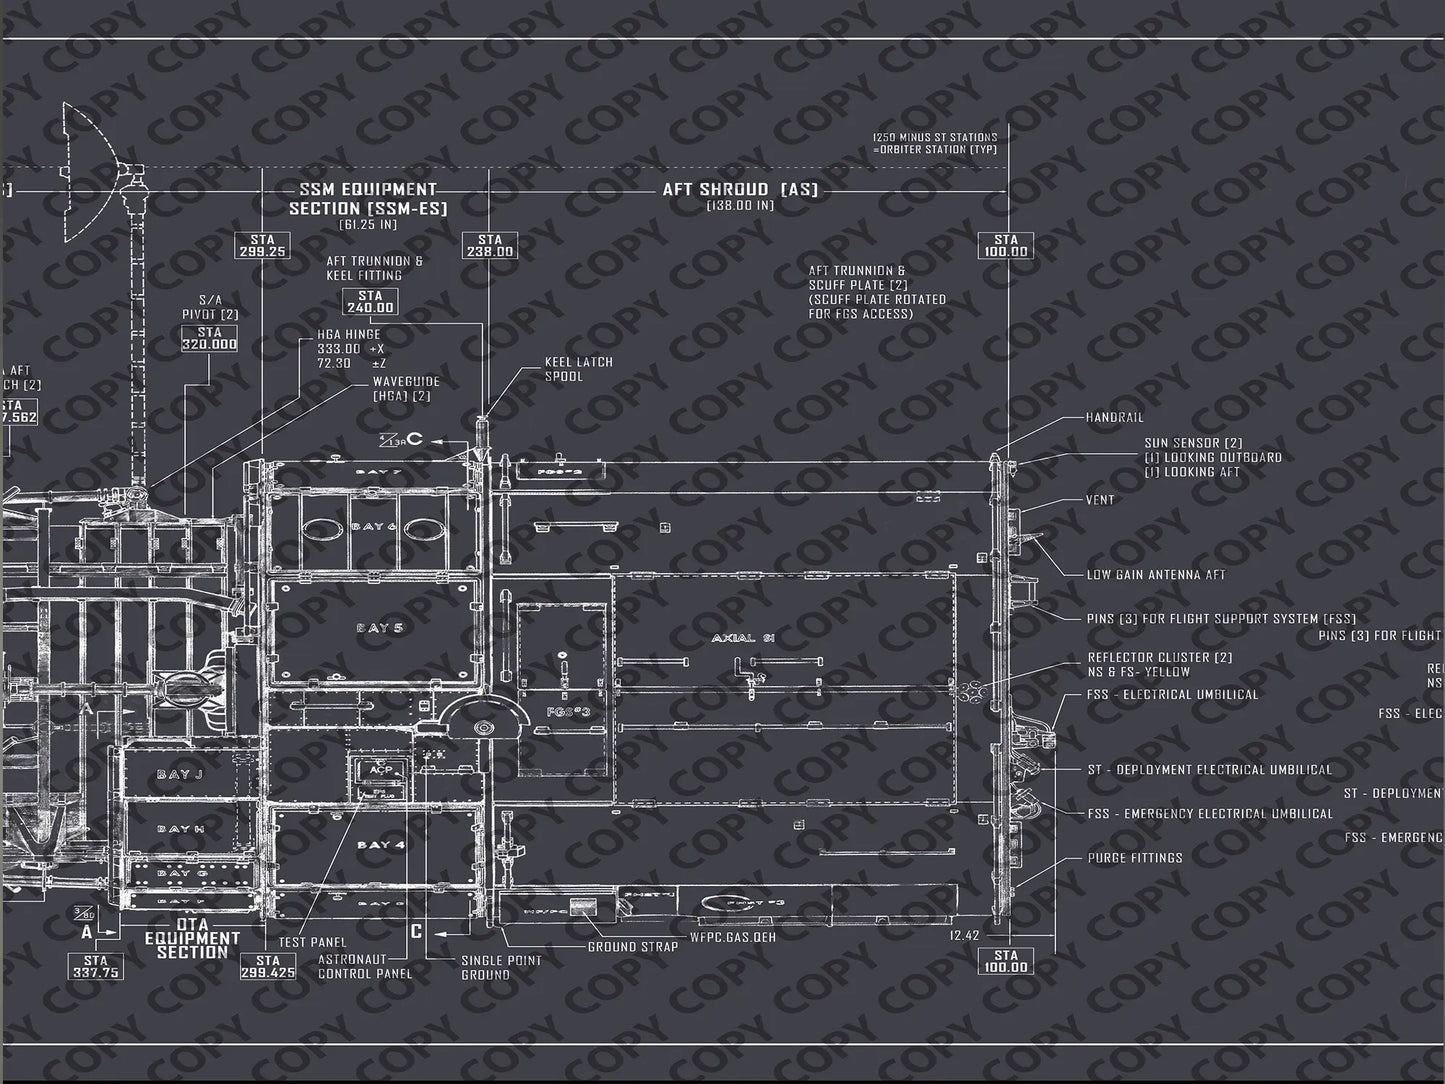 Hubble Space Telescope Blueprint | Rocket Blueprint Posters | A section of the Hubble Space Telescope blueprint, featuring intricate technical drawings and labeled parts like the SSM equipment section, astronaut control panel, and reflector cluster against a dark background.